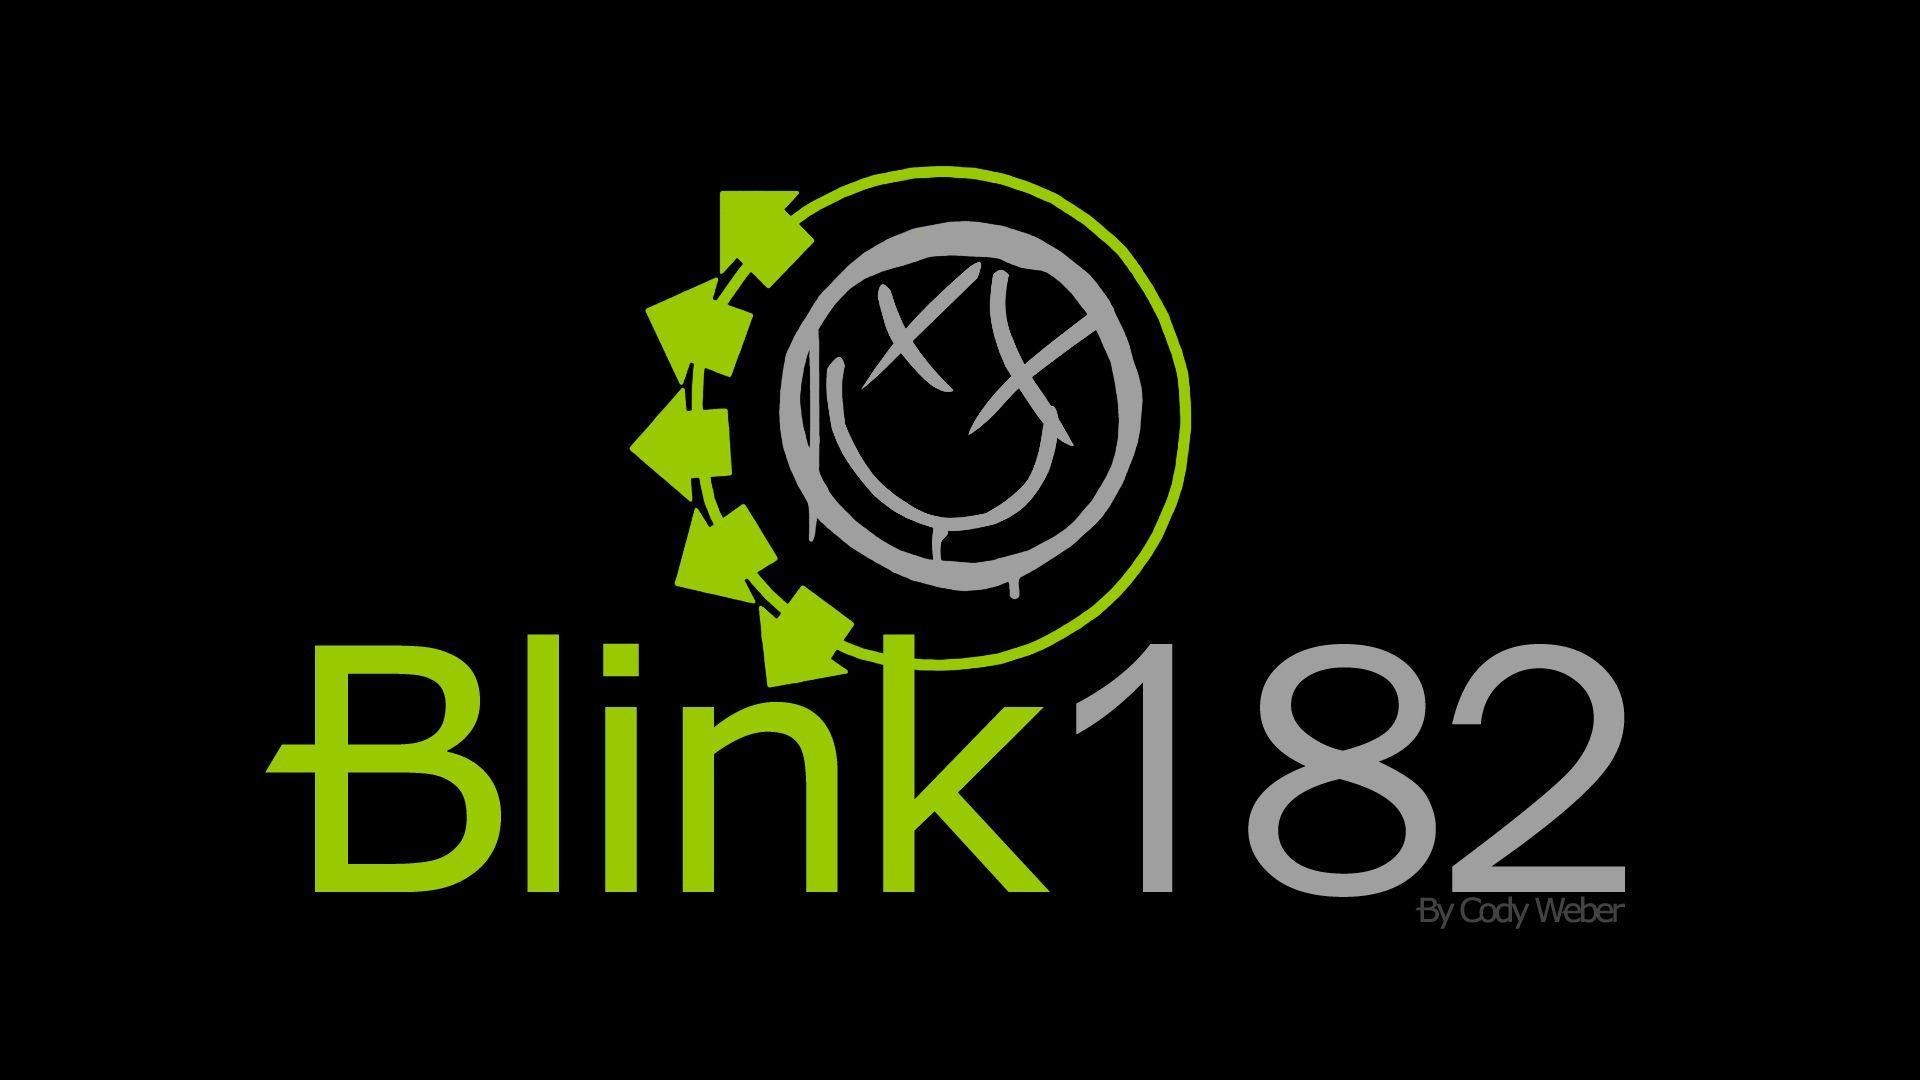 1920x1080 Wallpapers For > Blink 182 Ipad Wallpaper